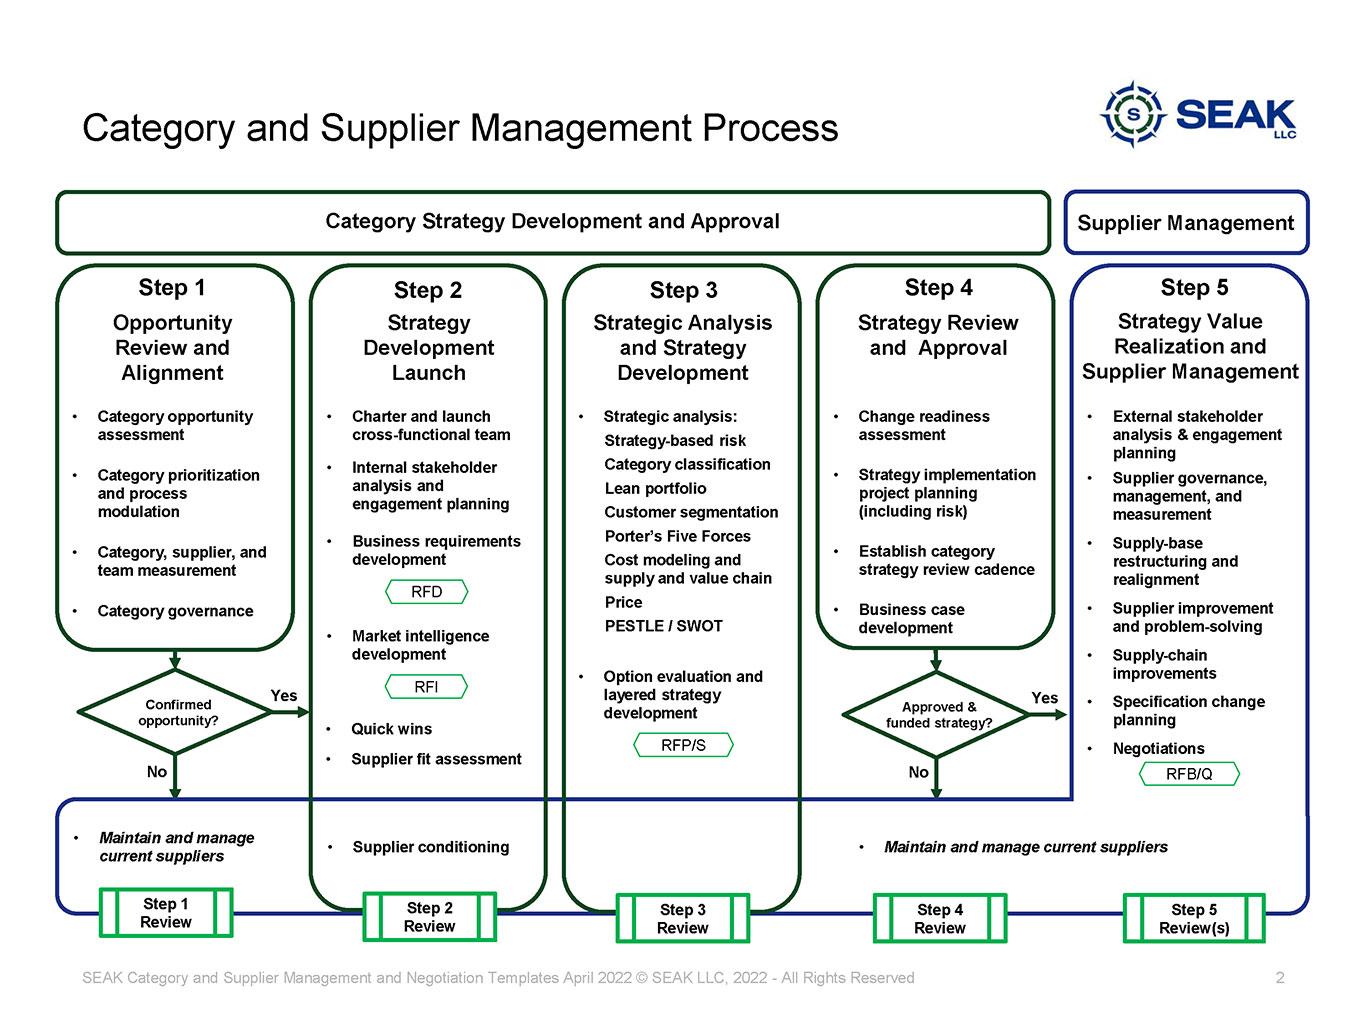 Seak, LLC Category and Supplier Management Process